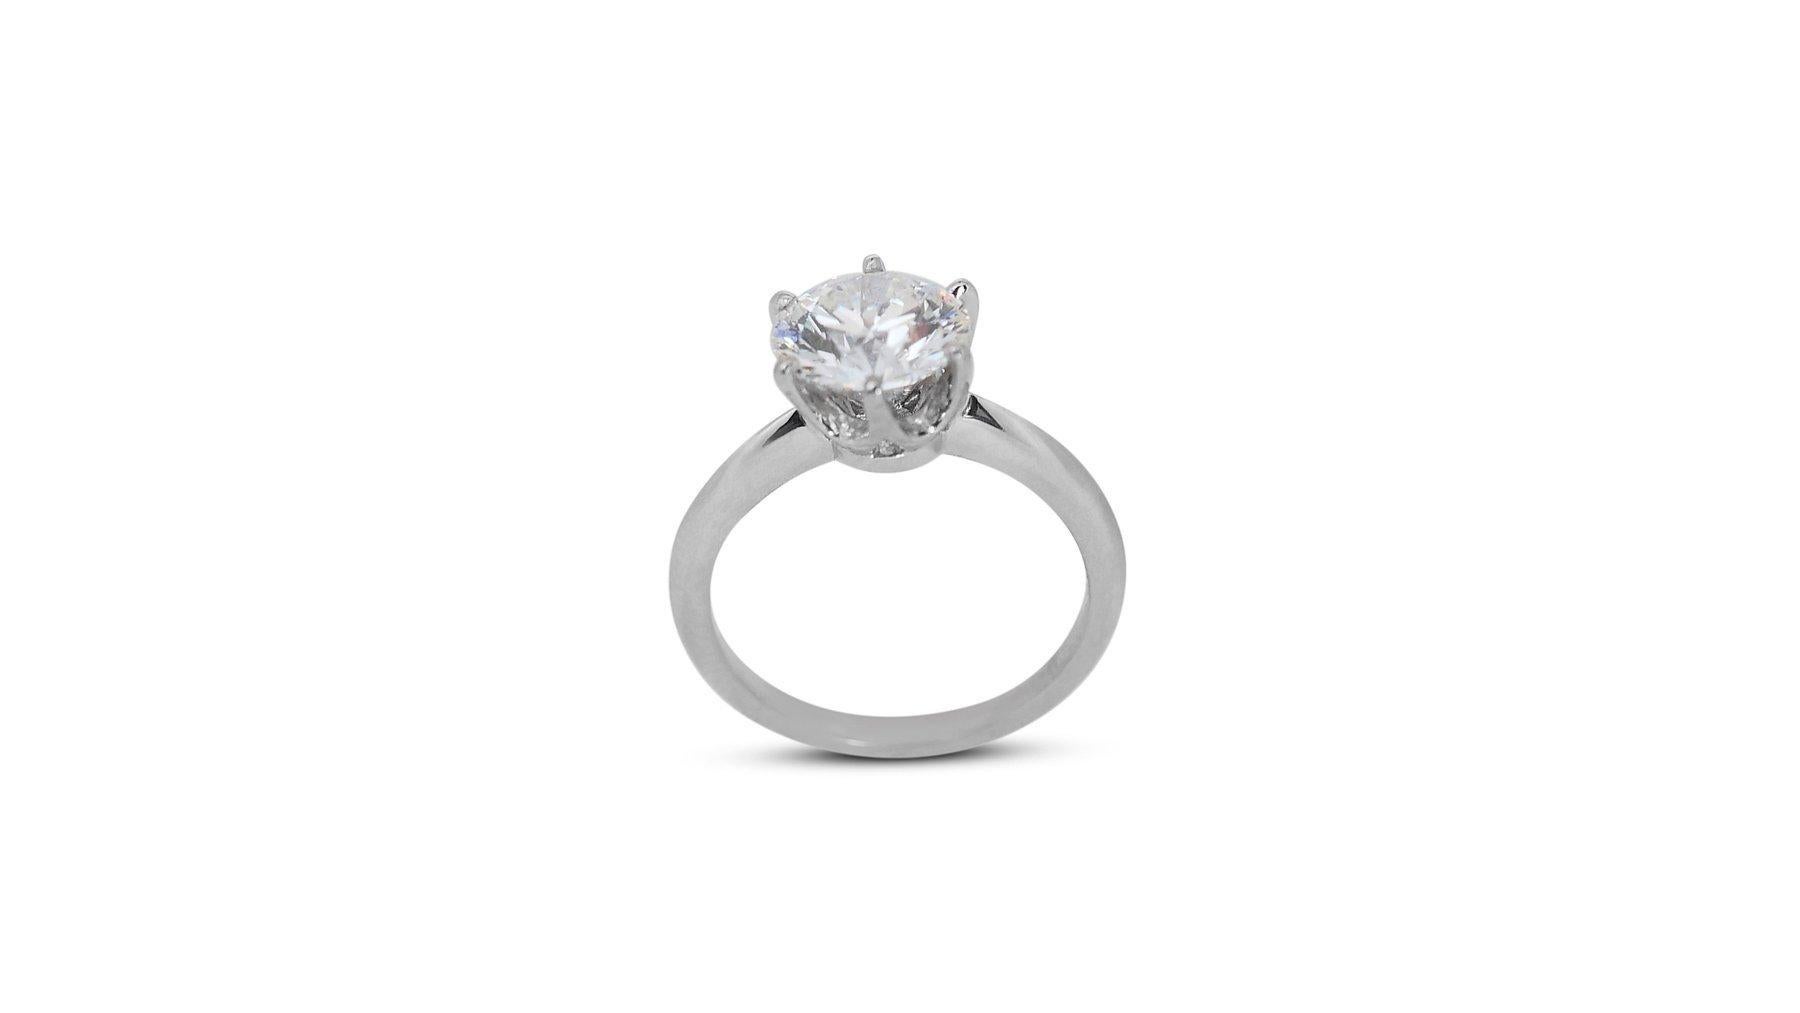 Timeless 3.09ct Diamond Solitaire Ring in 18k White Gold - GIA Certified For Sale 1